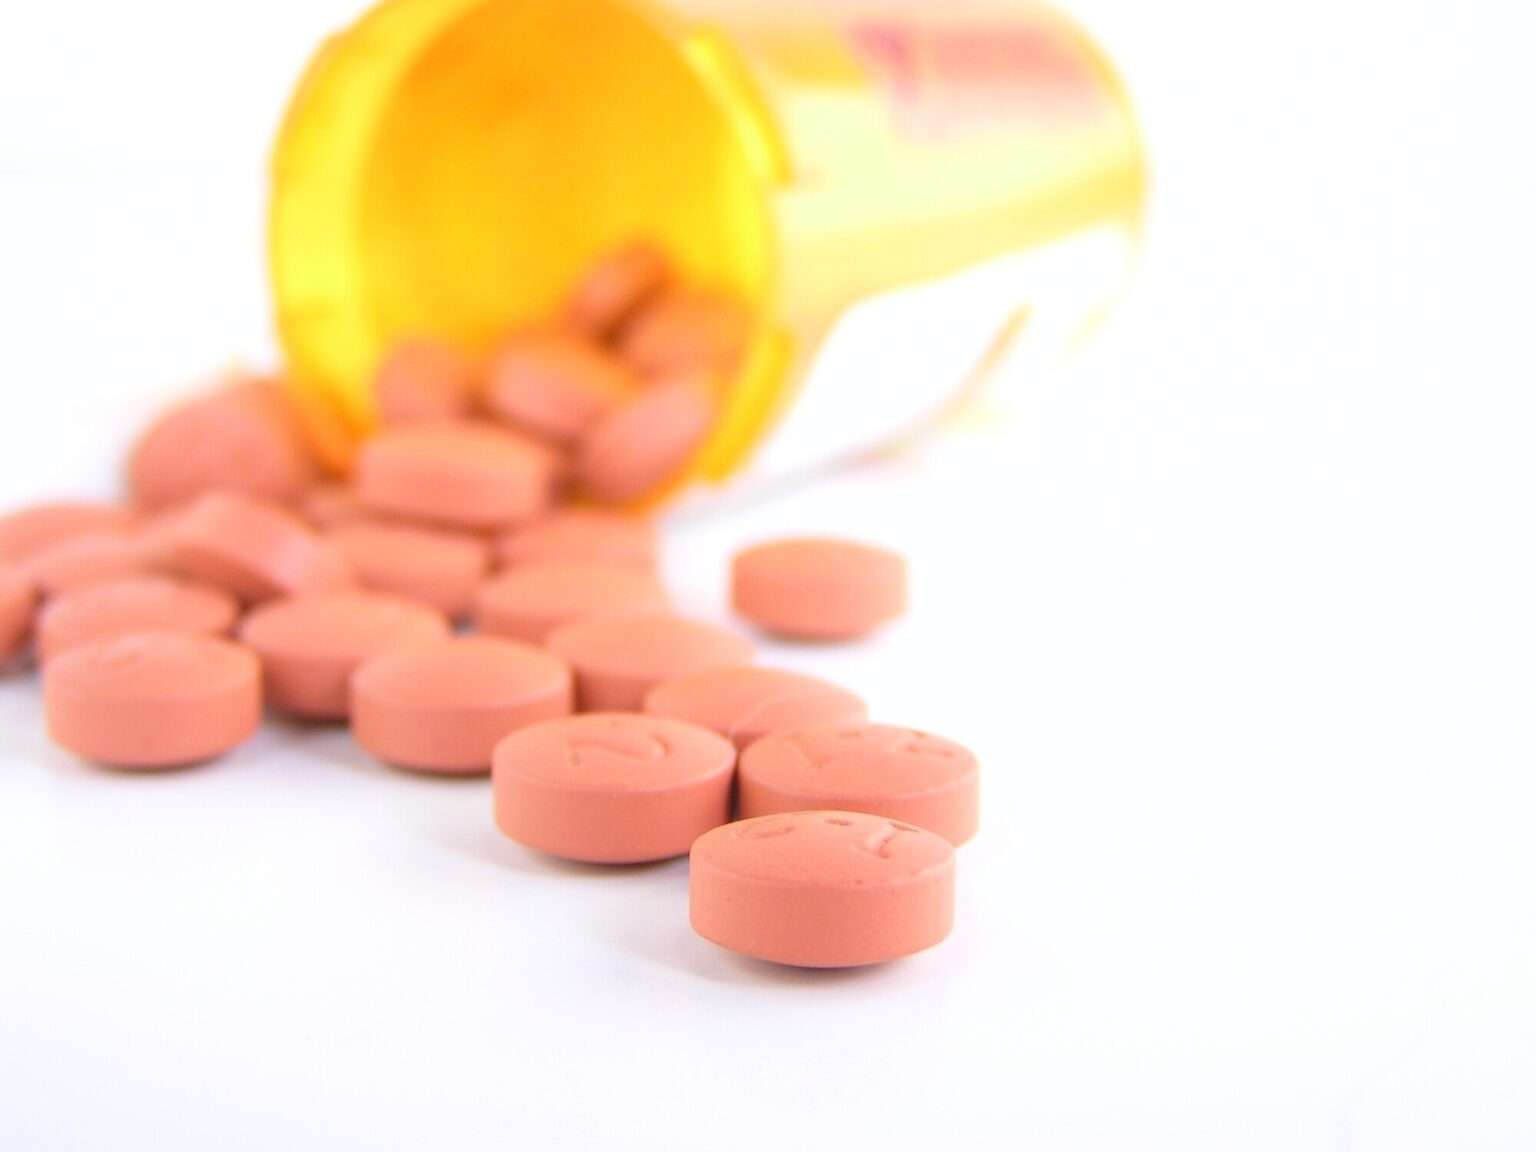 Meds 101: How Can I Refill My Prescription without Refills?